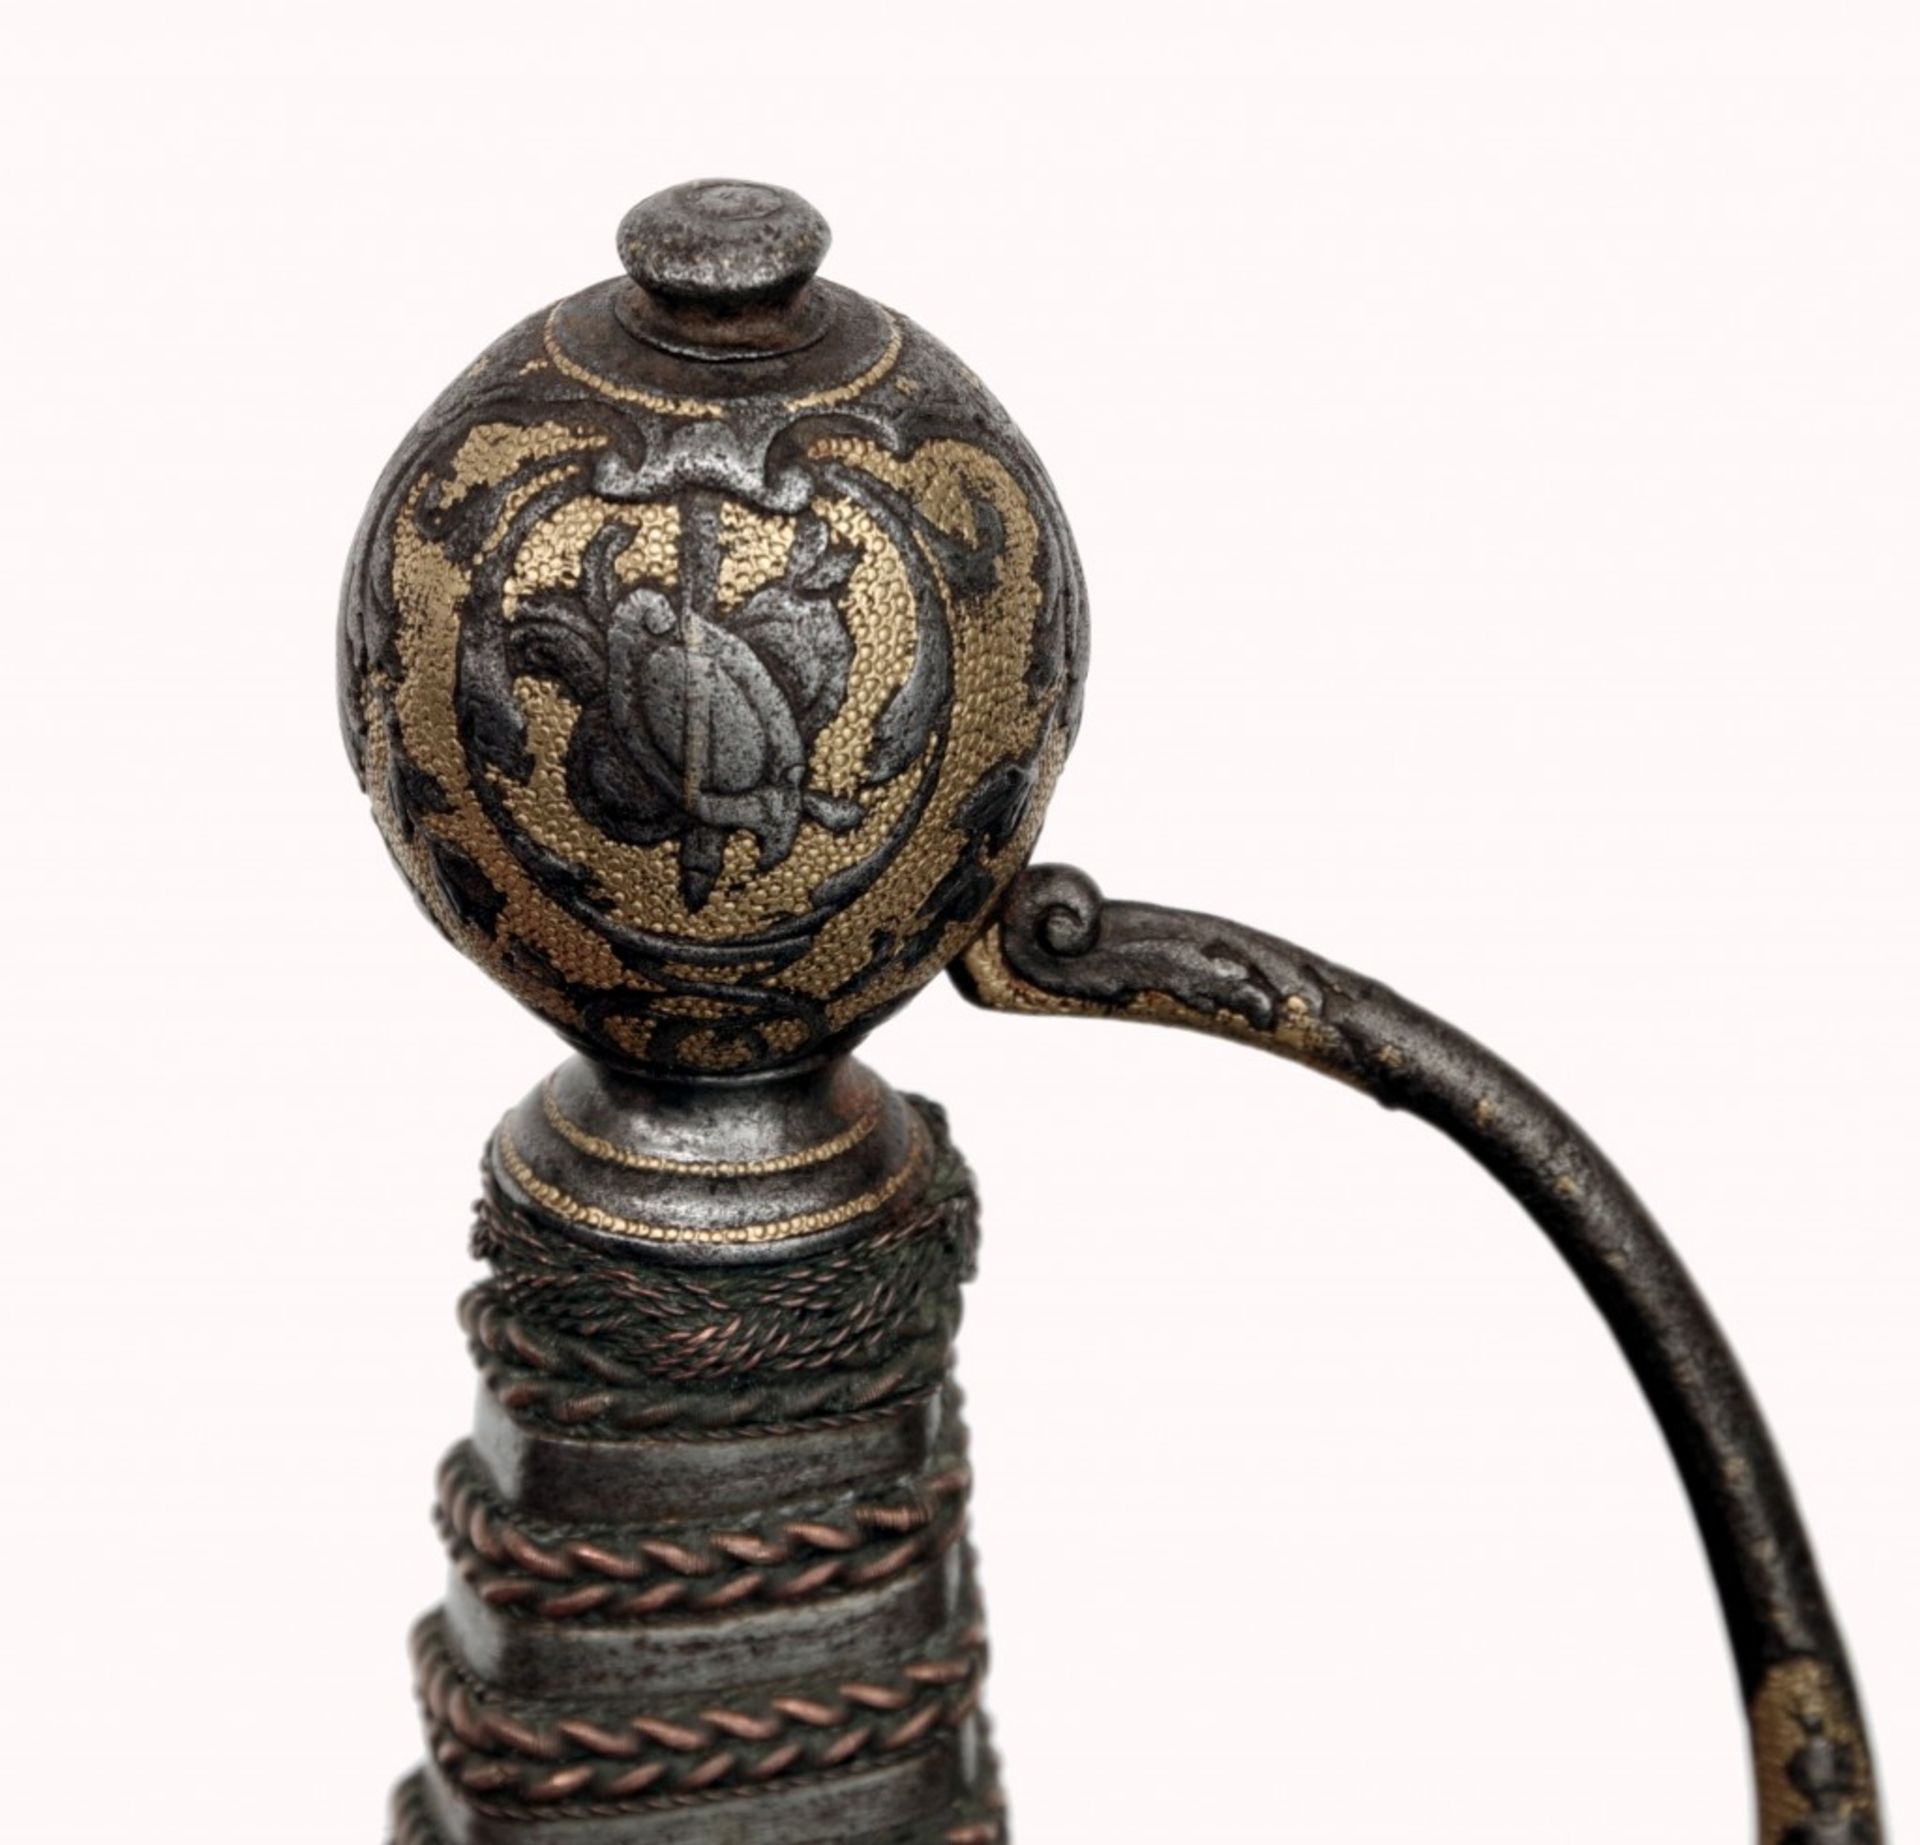 A French Gilt Small-sword with Chiselled Hilt by Jean Louis Guyon the Elder - Image 7 of 11